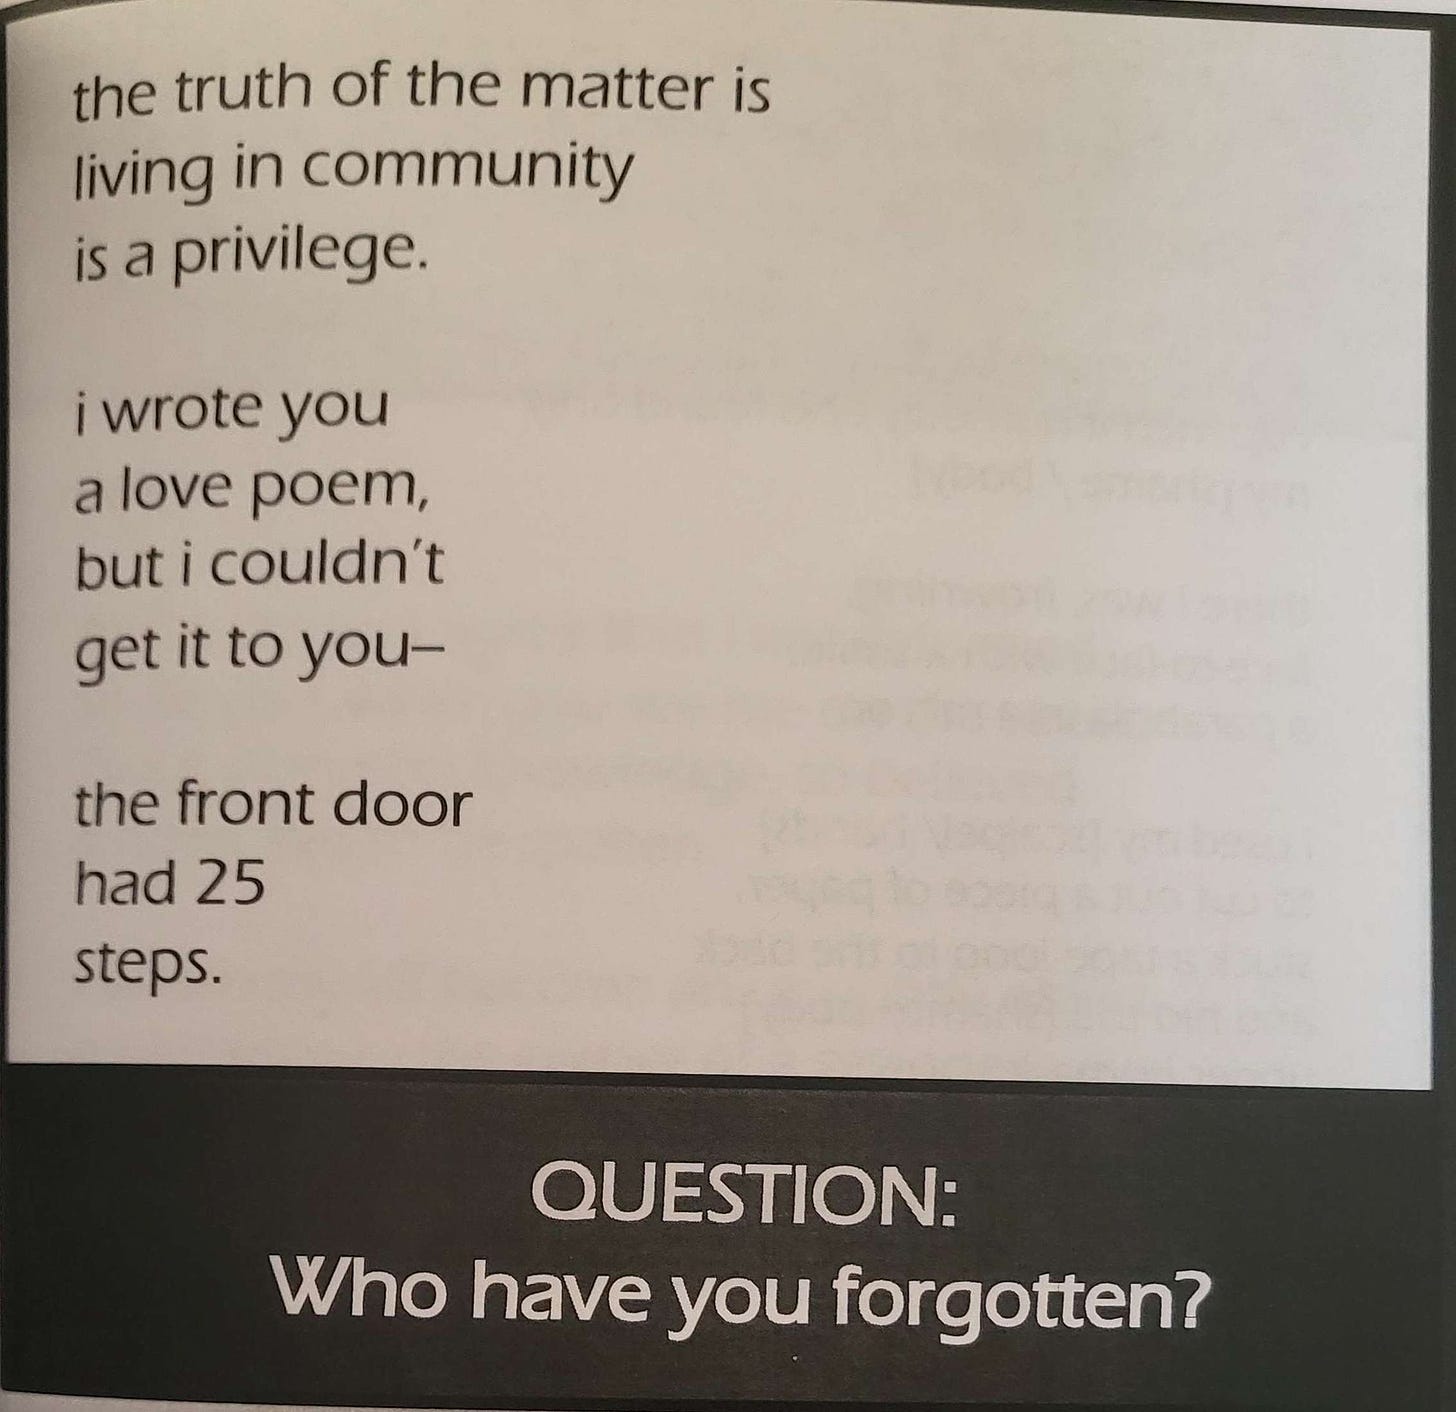 the truth of the matter is / living in community / is a privilege. // i wrote you / a love poem, / but i couldn't / get it to you-- // the front door / had 25 / steps. question: who have you forgotten?